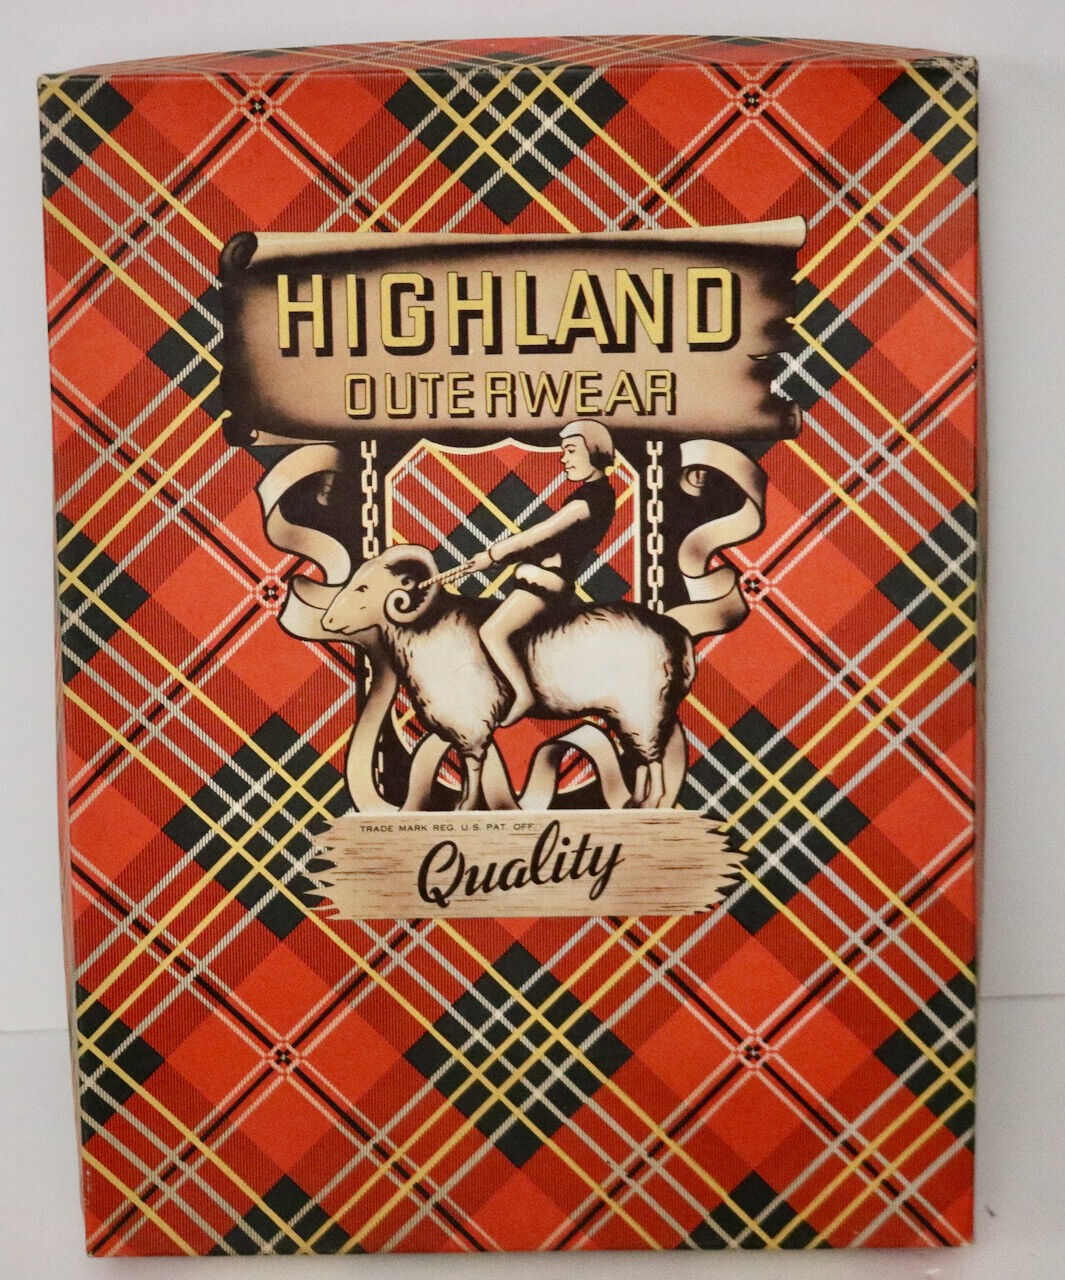 Highland Outerwear clothing box vintage 1928